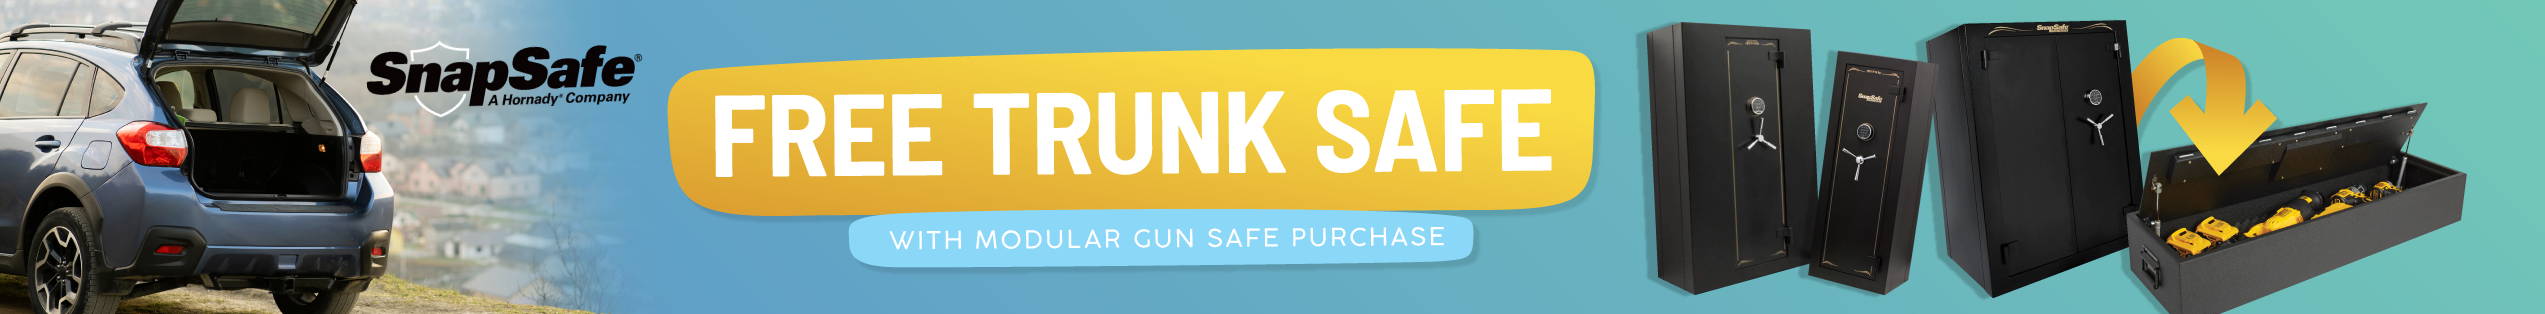 Free Trunk Safe with purchase of SnapSafe Modular Gun Safe